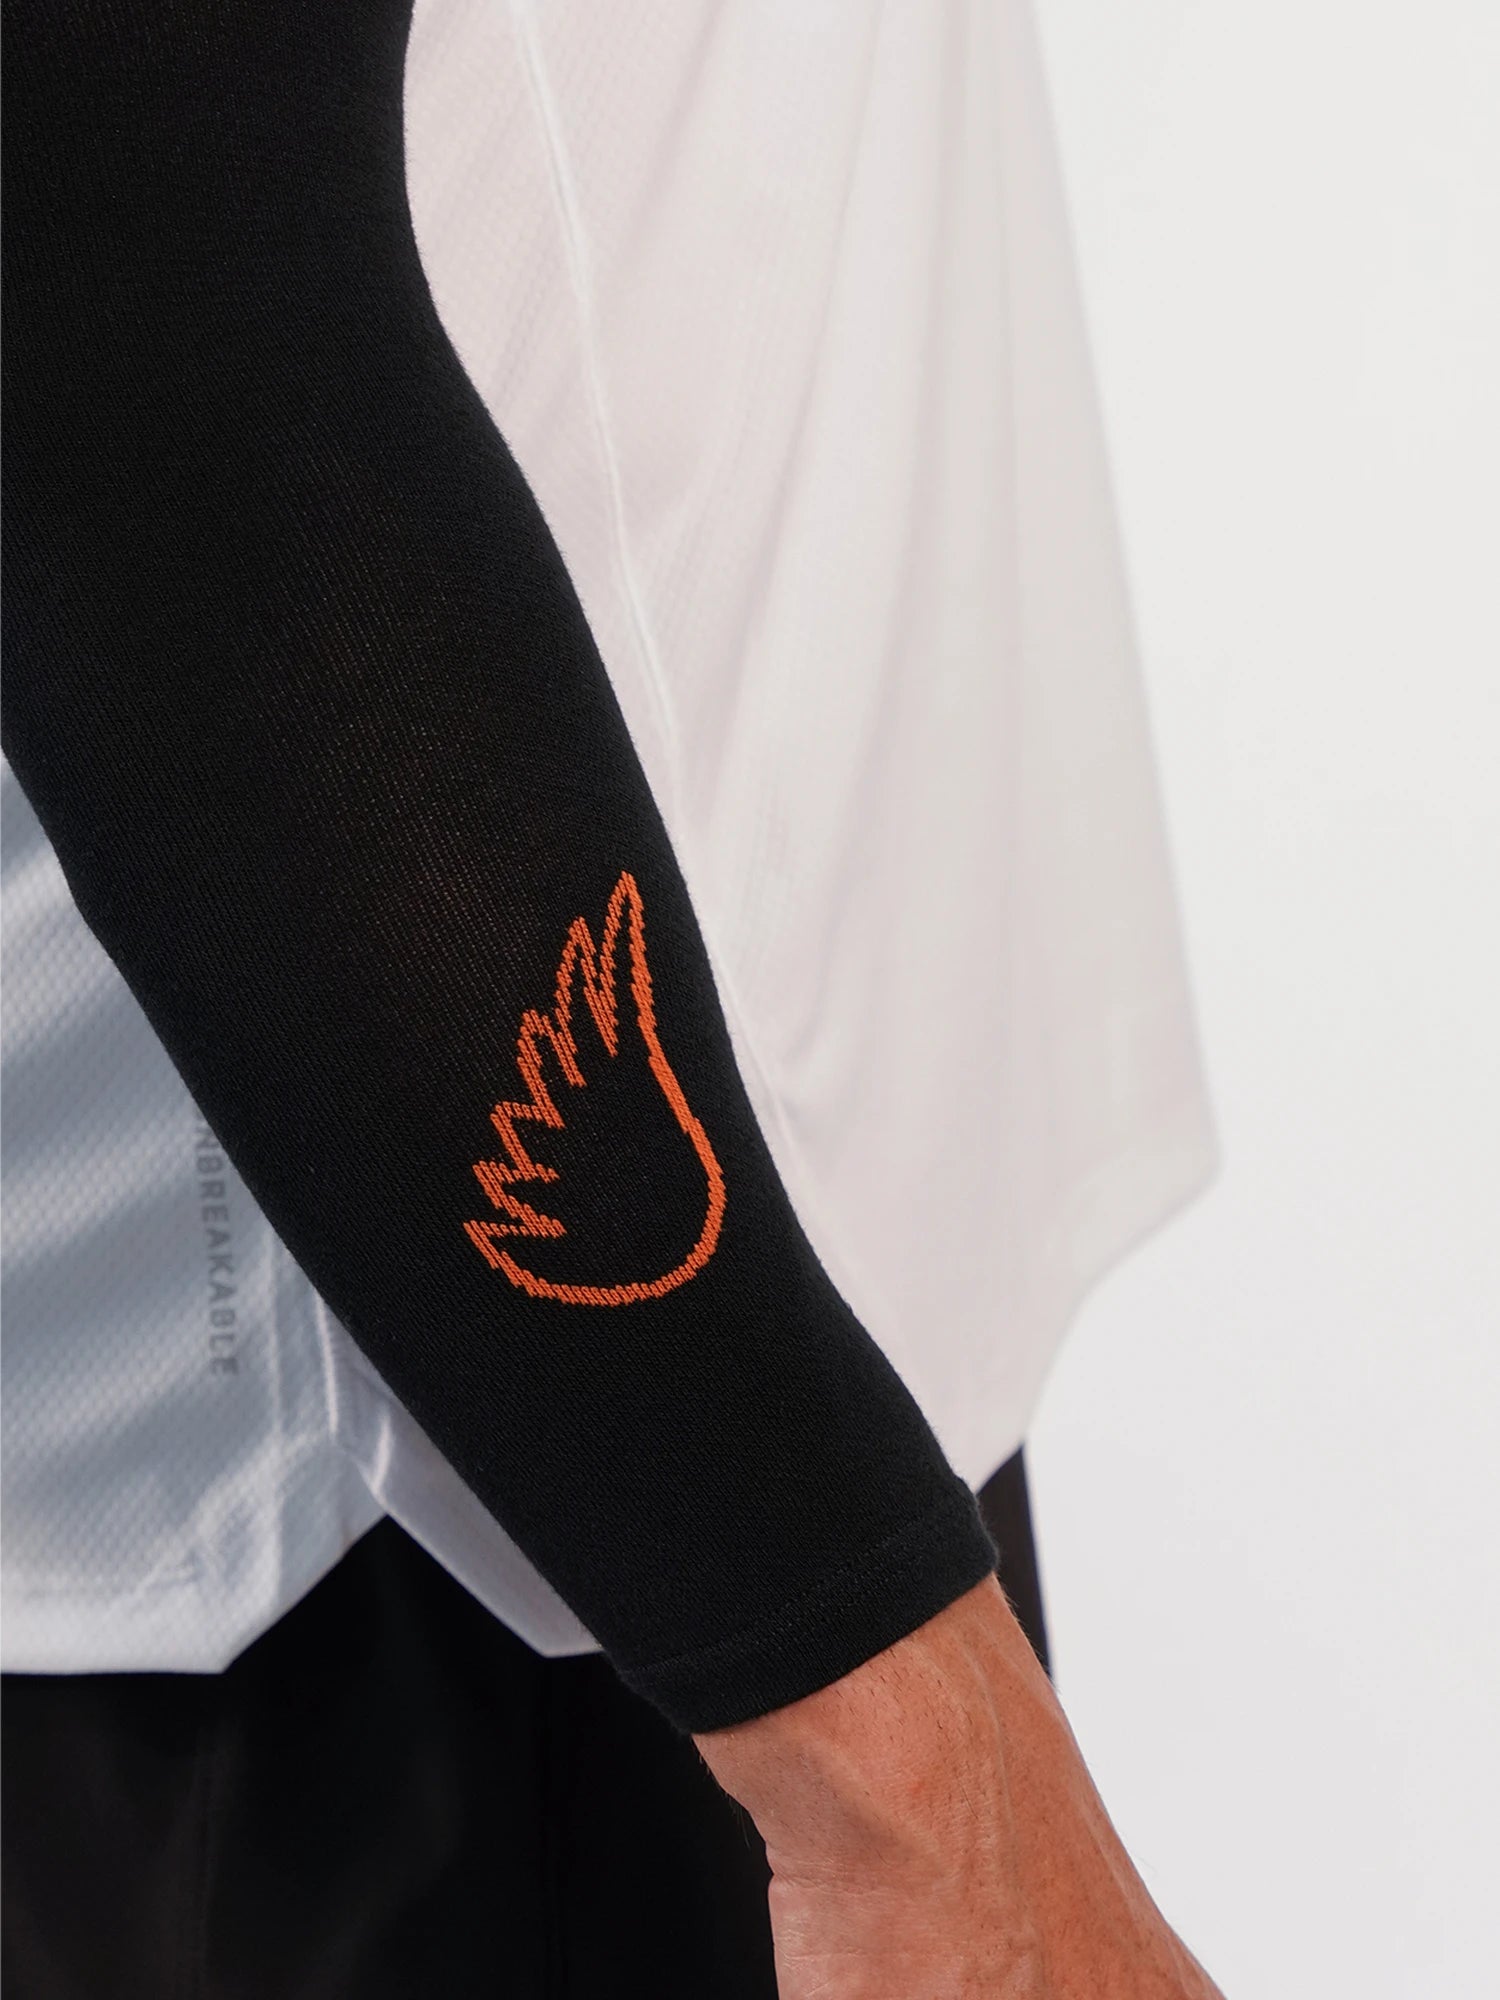 Anti-Fatigue & Recovery Compression Arm Sleeves